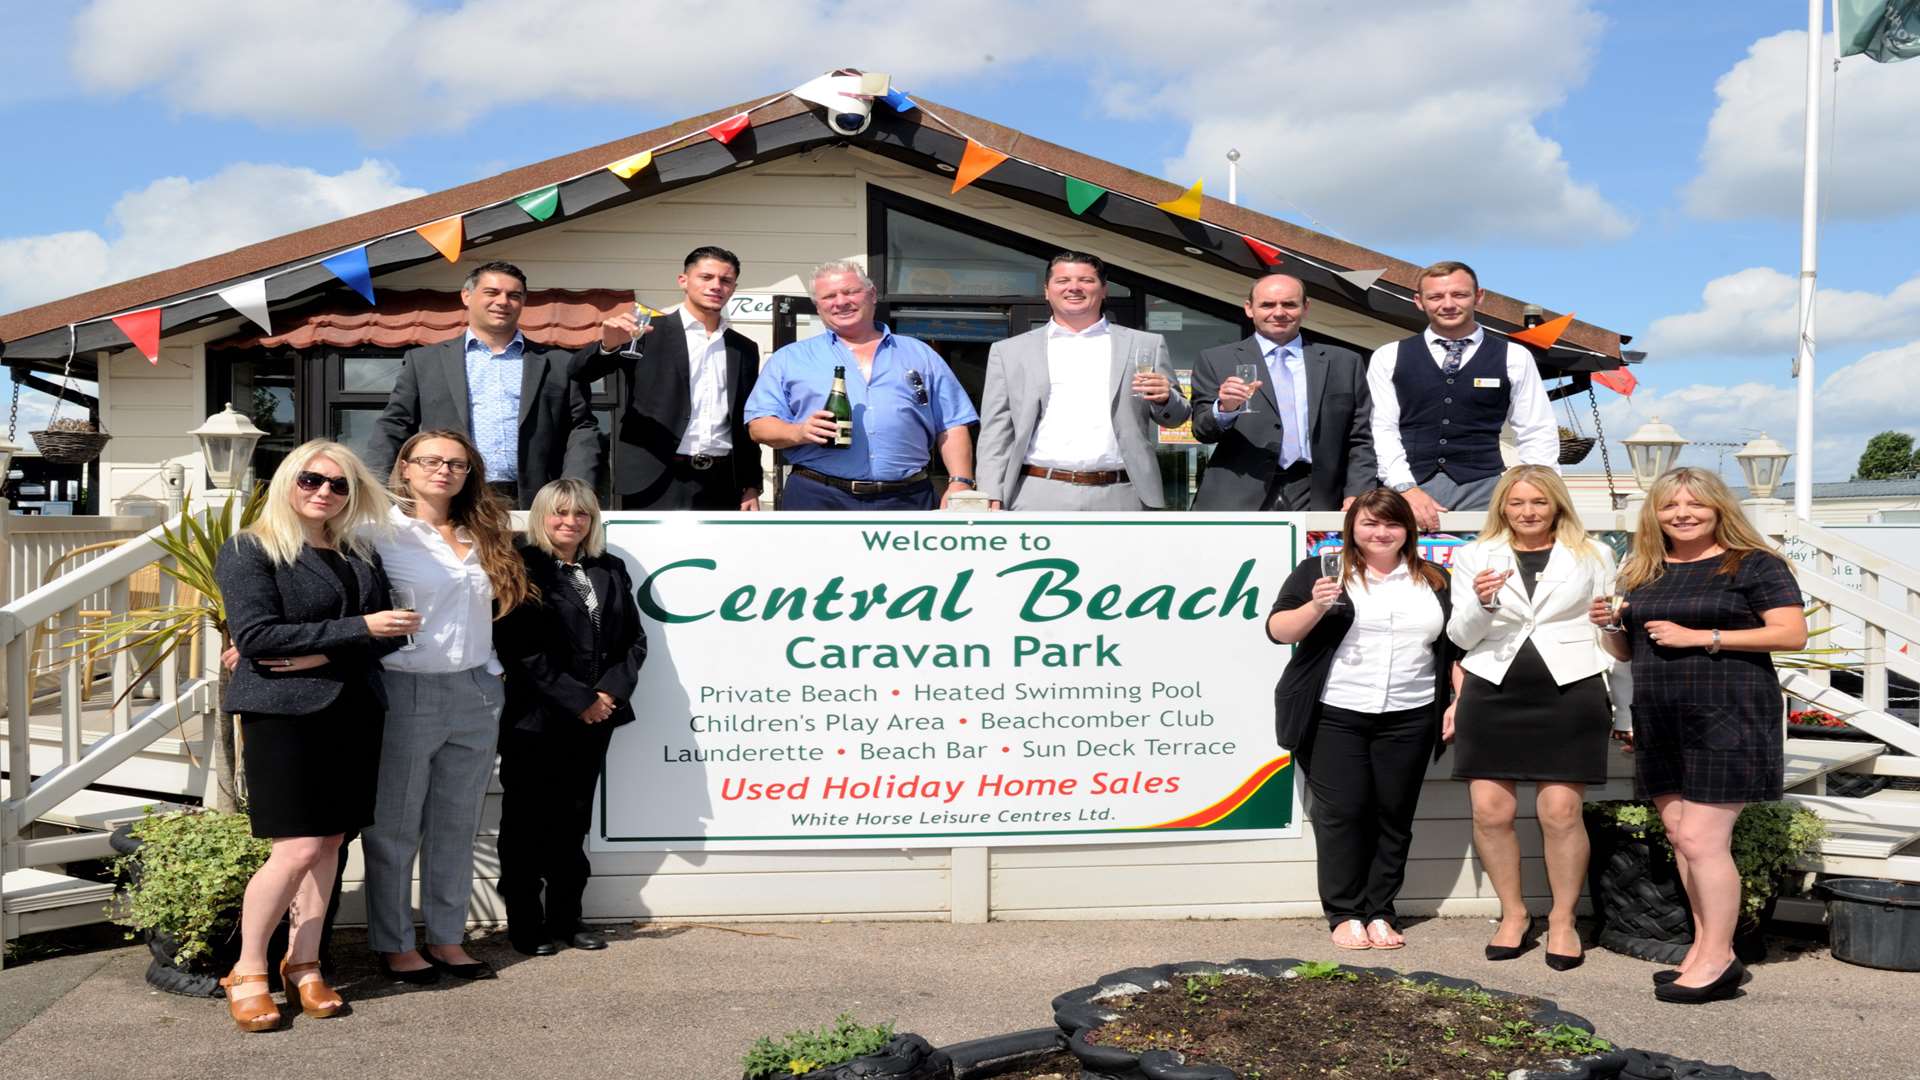 Central Beach is handed over to Cosgrove Leisure.